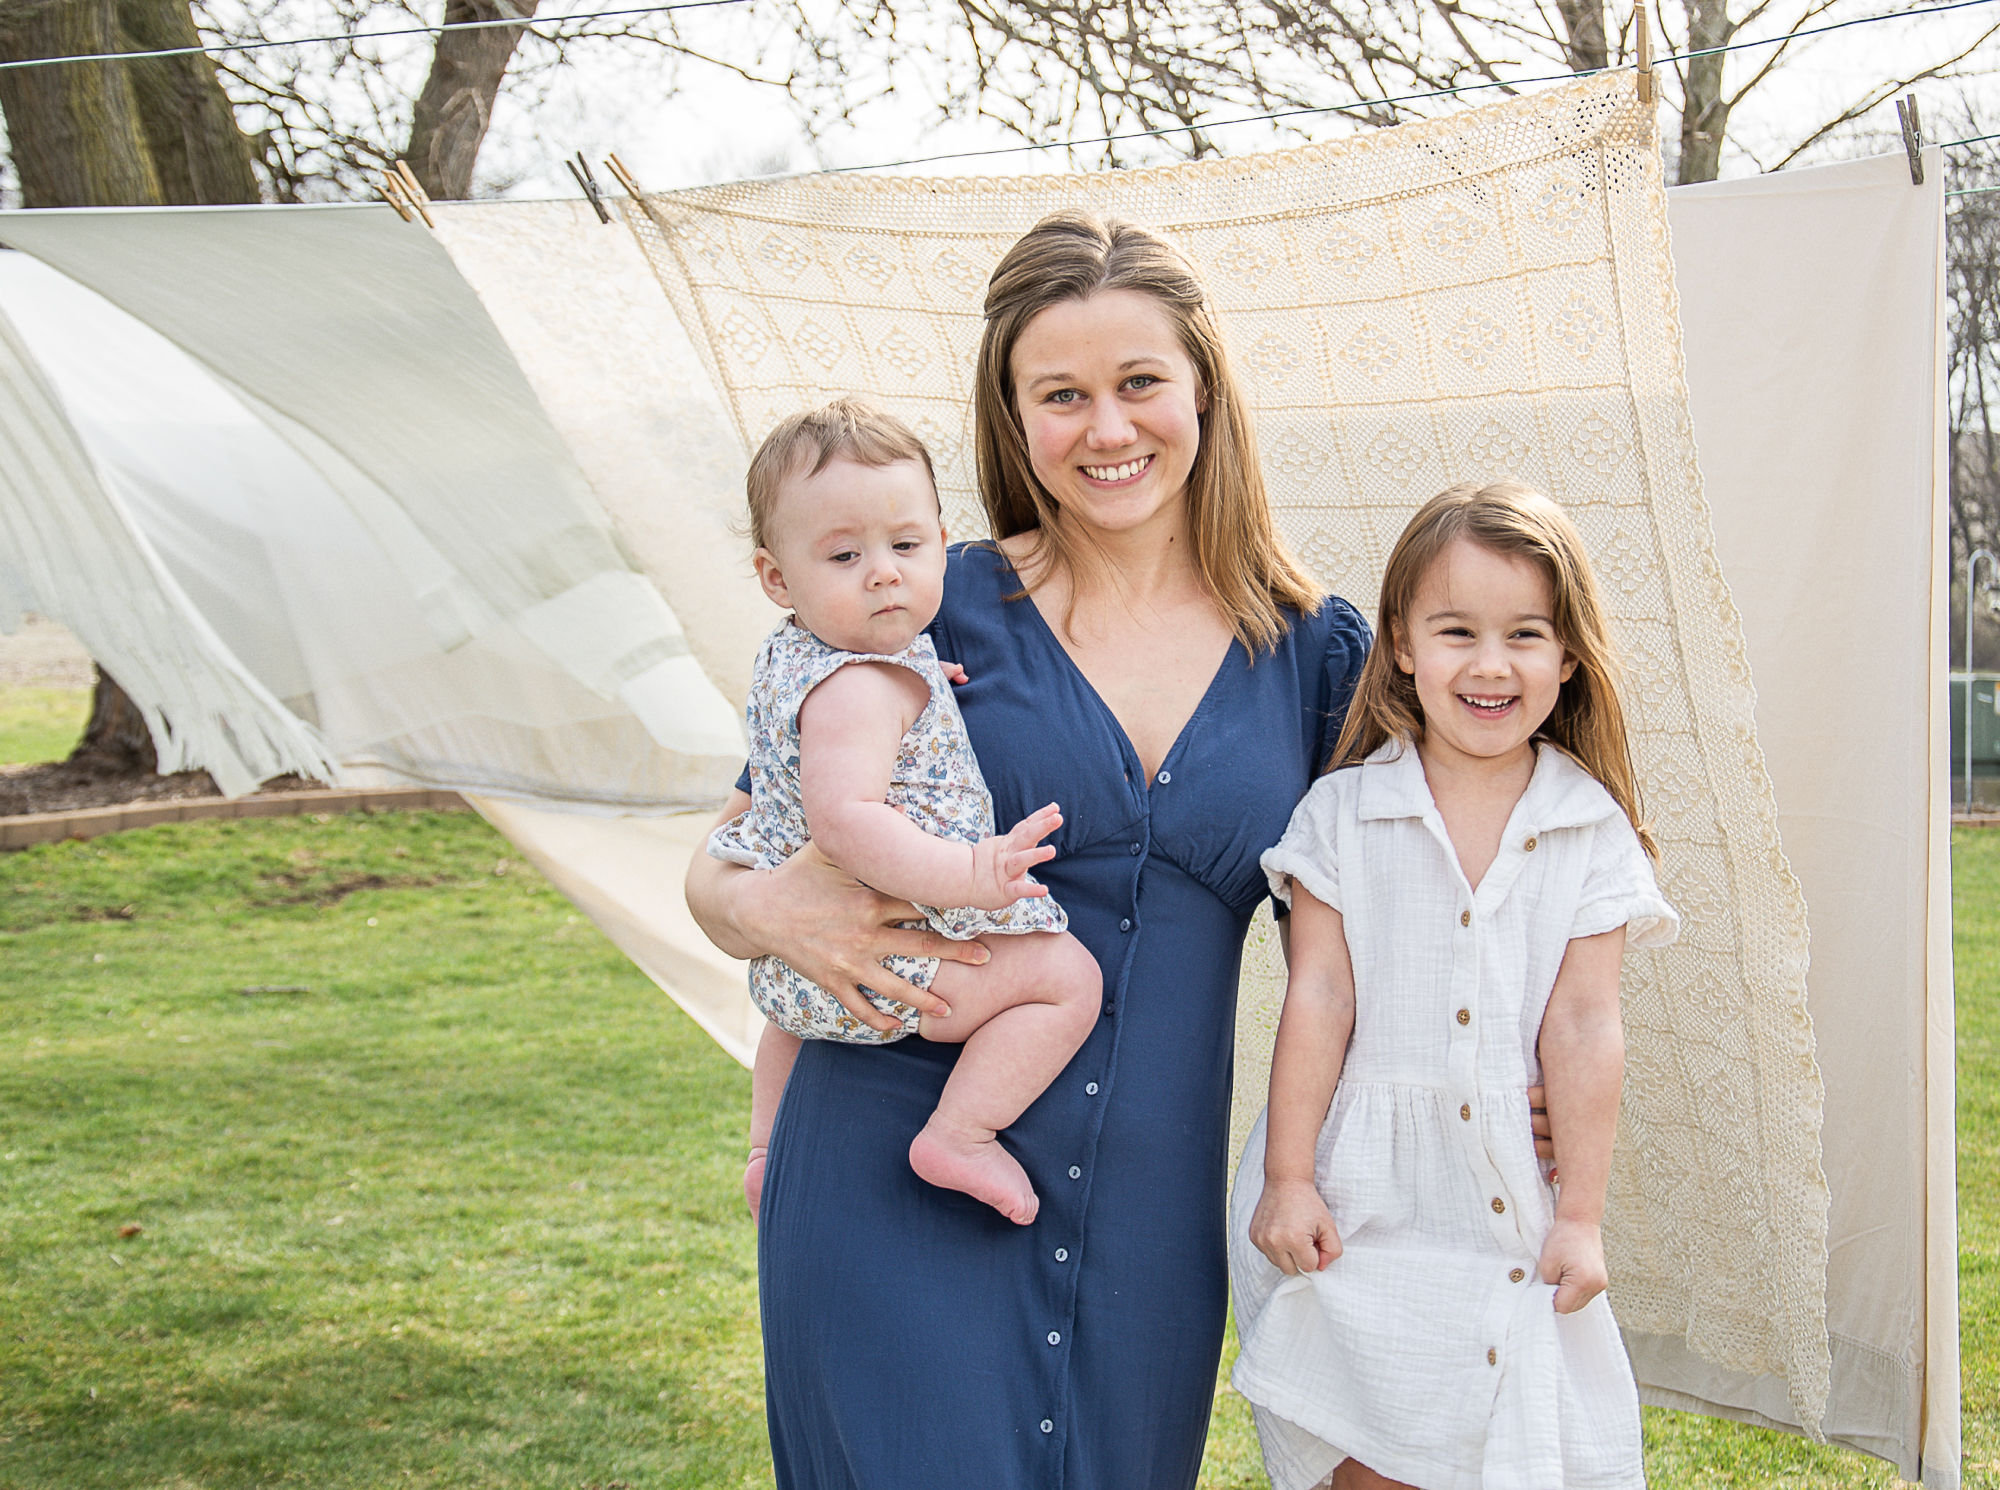 Image of a mom with a baby and little girl taken outdoors with a clothesline